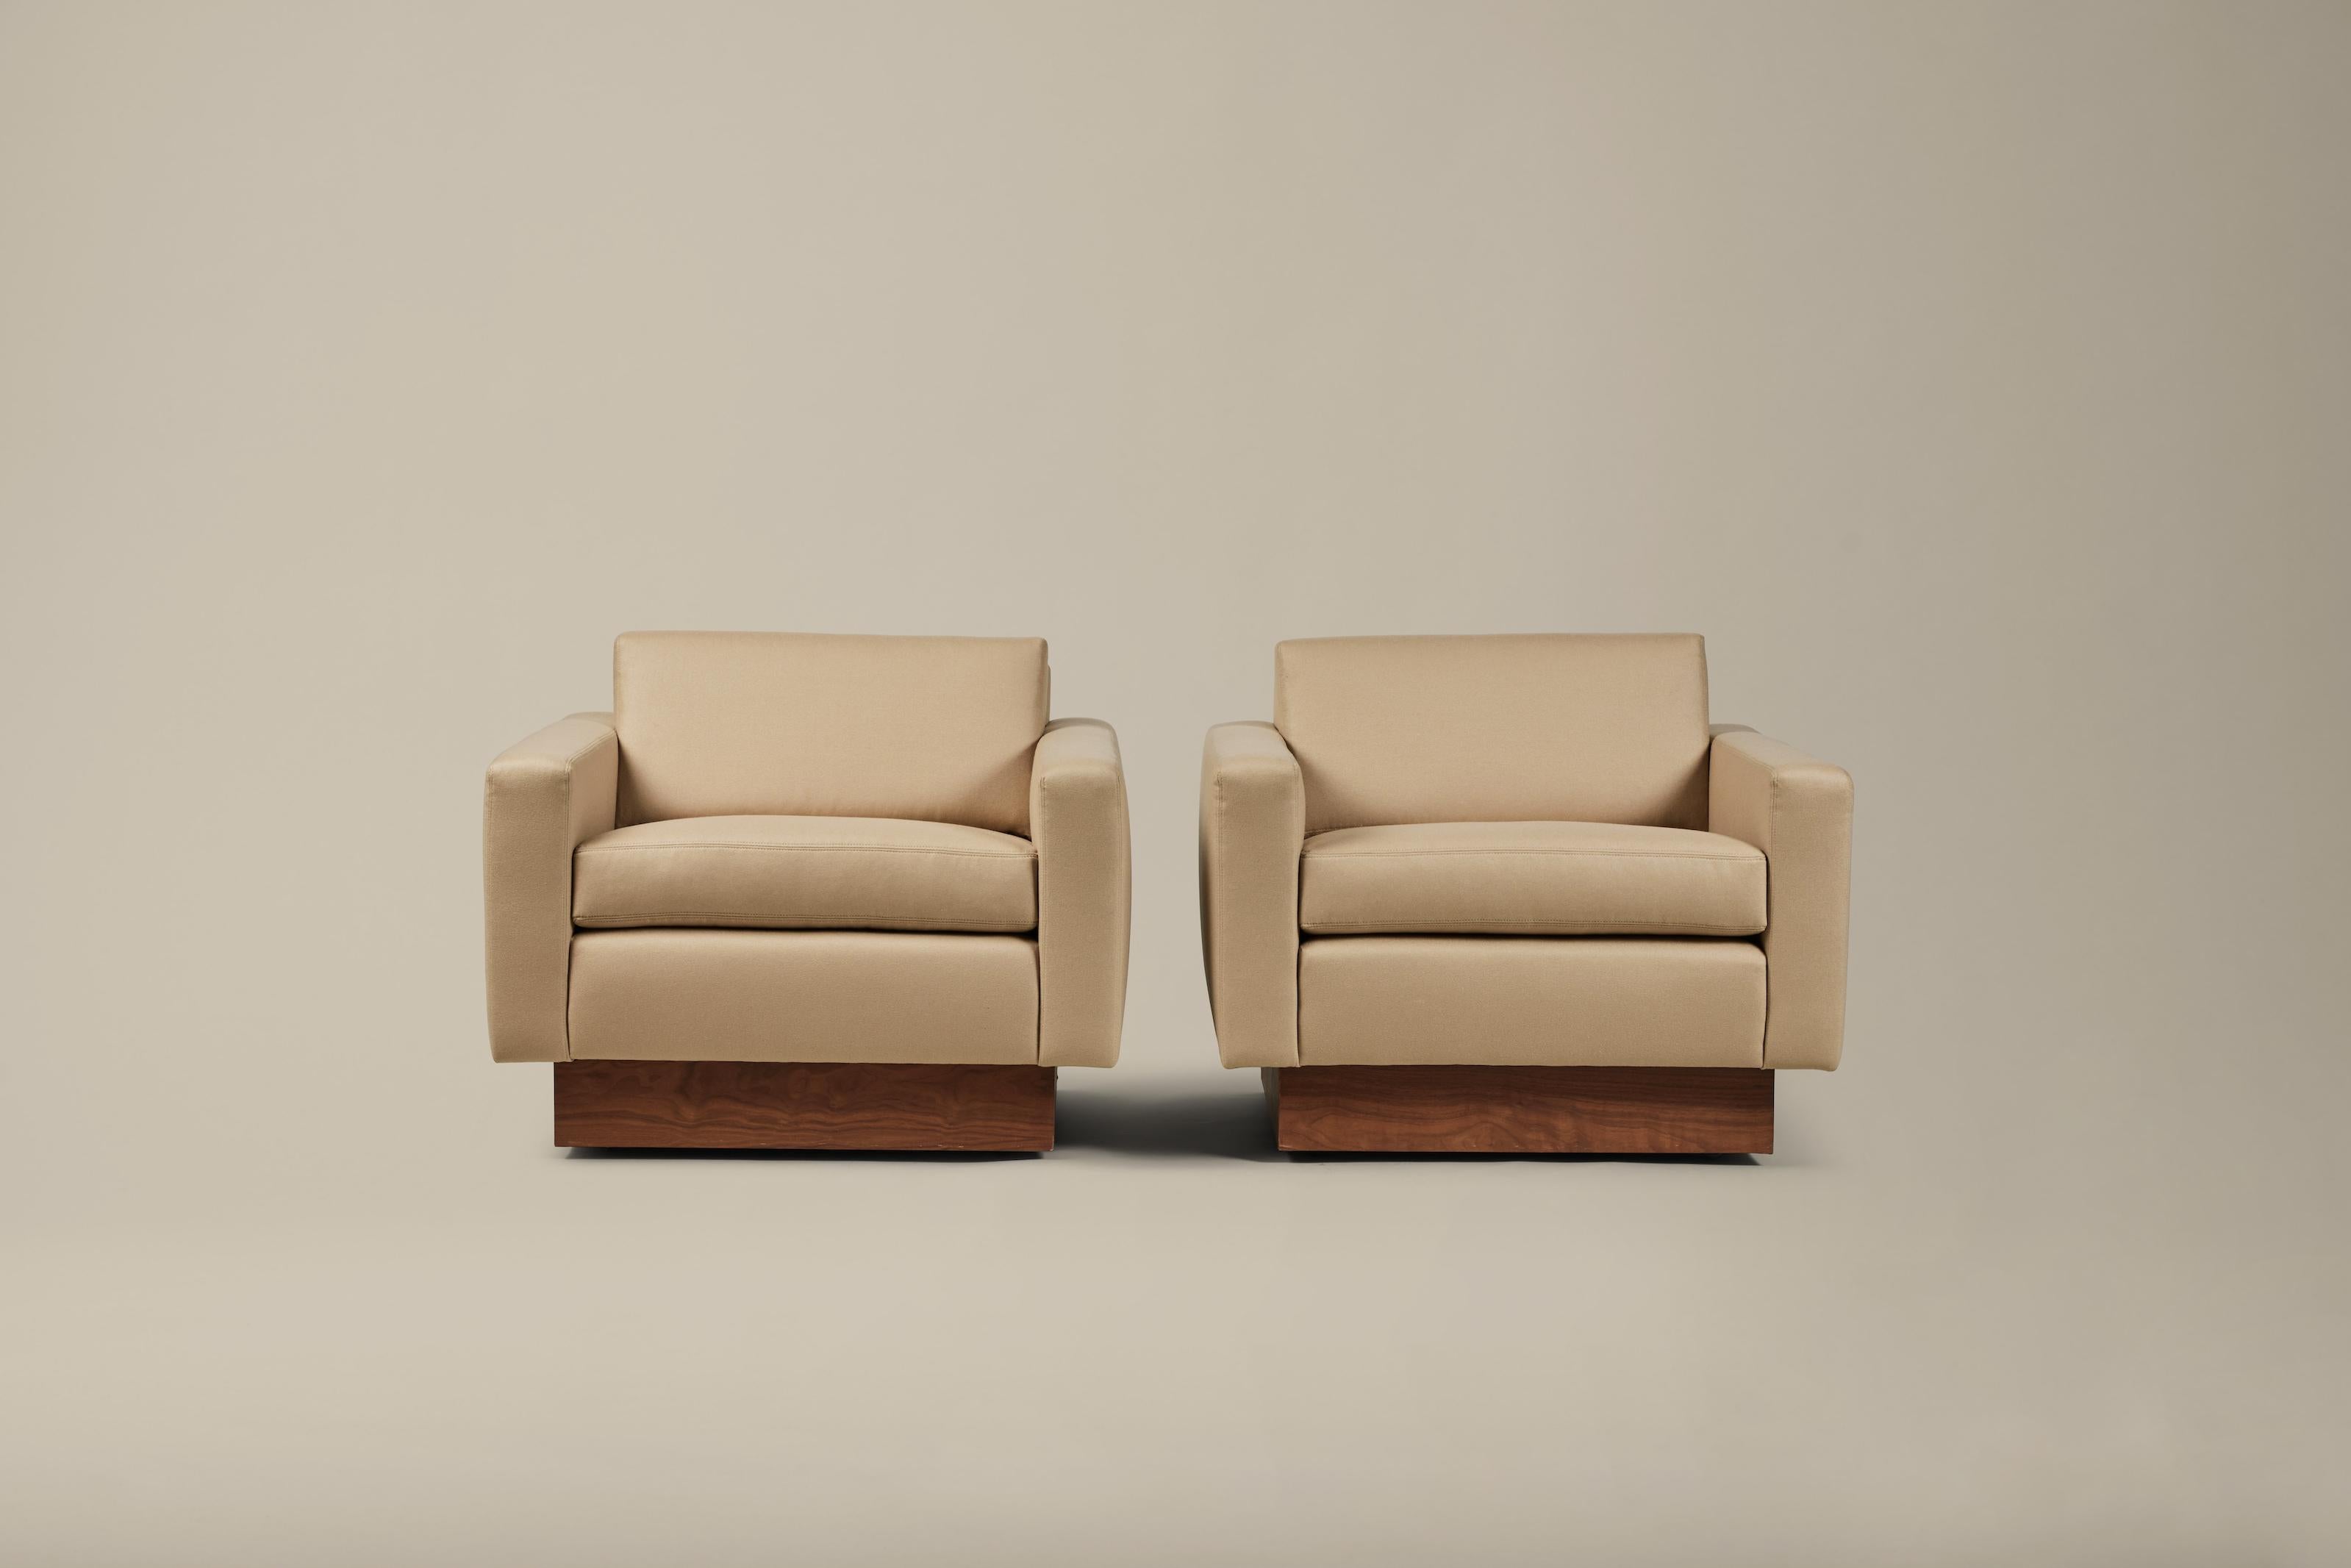 Introducing a pair of stunning mid-century club chairs, reflecting the iconic style of American furniture designer Milo Baughman. Known for sleek simplicity, these chairs bring a touch of vintage elegance and modern functionality, all on hidden